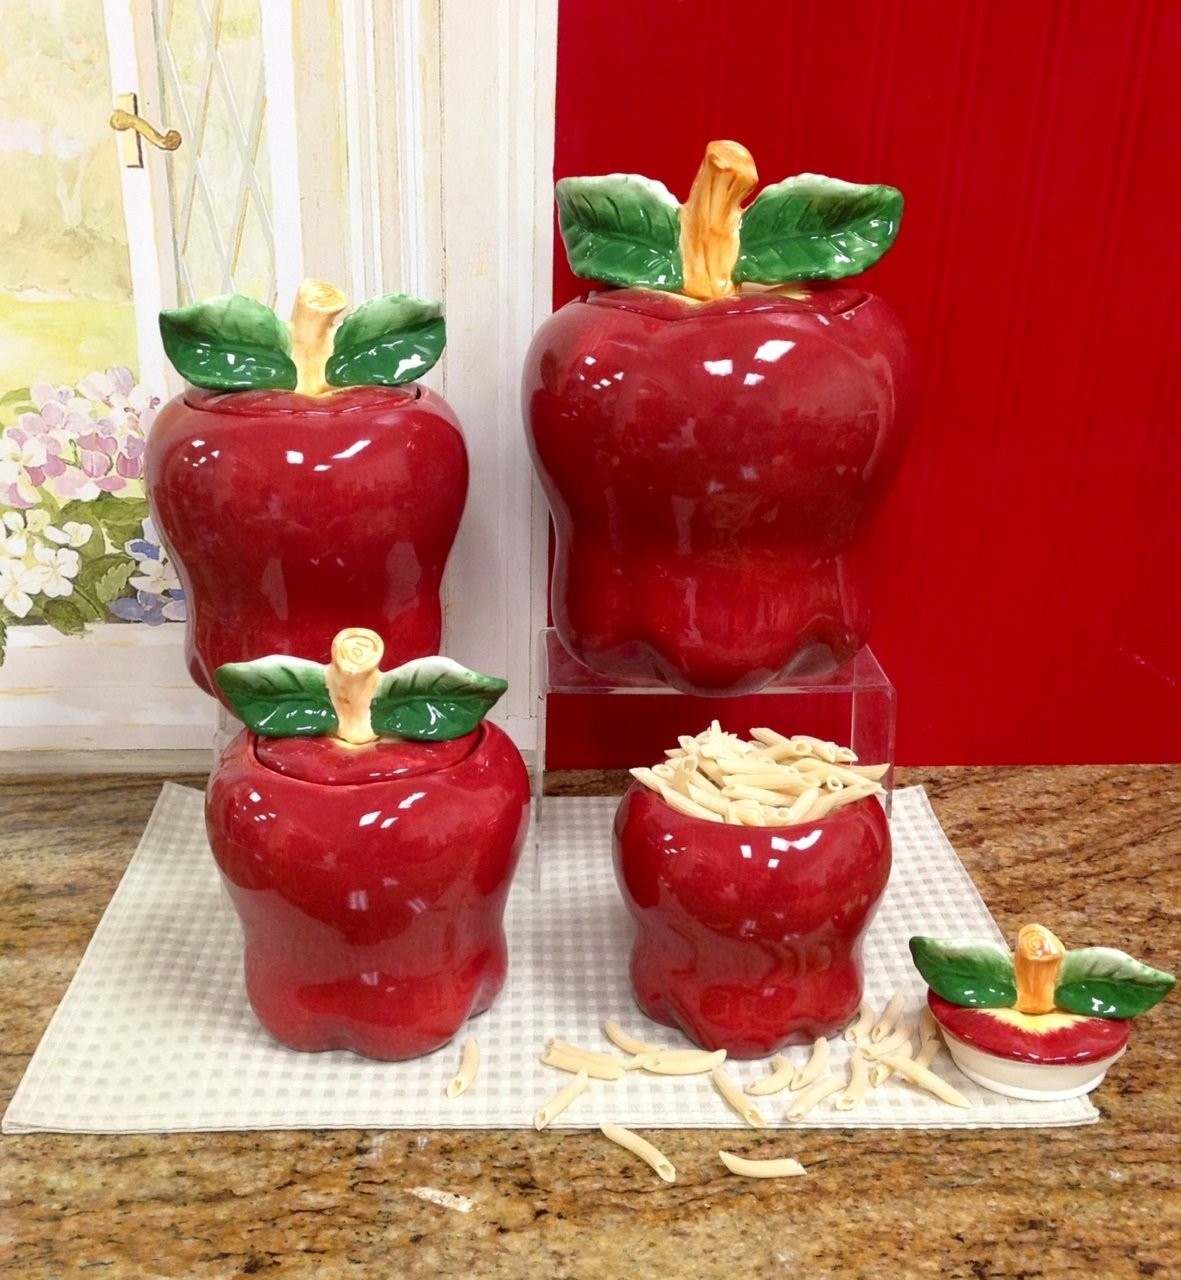 Set of 4 Apple shaped red ceramic CANISTERS country kitchen home decor NEW